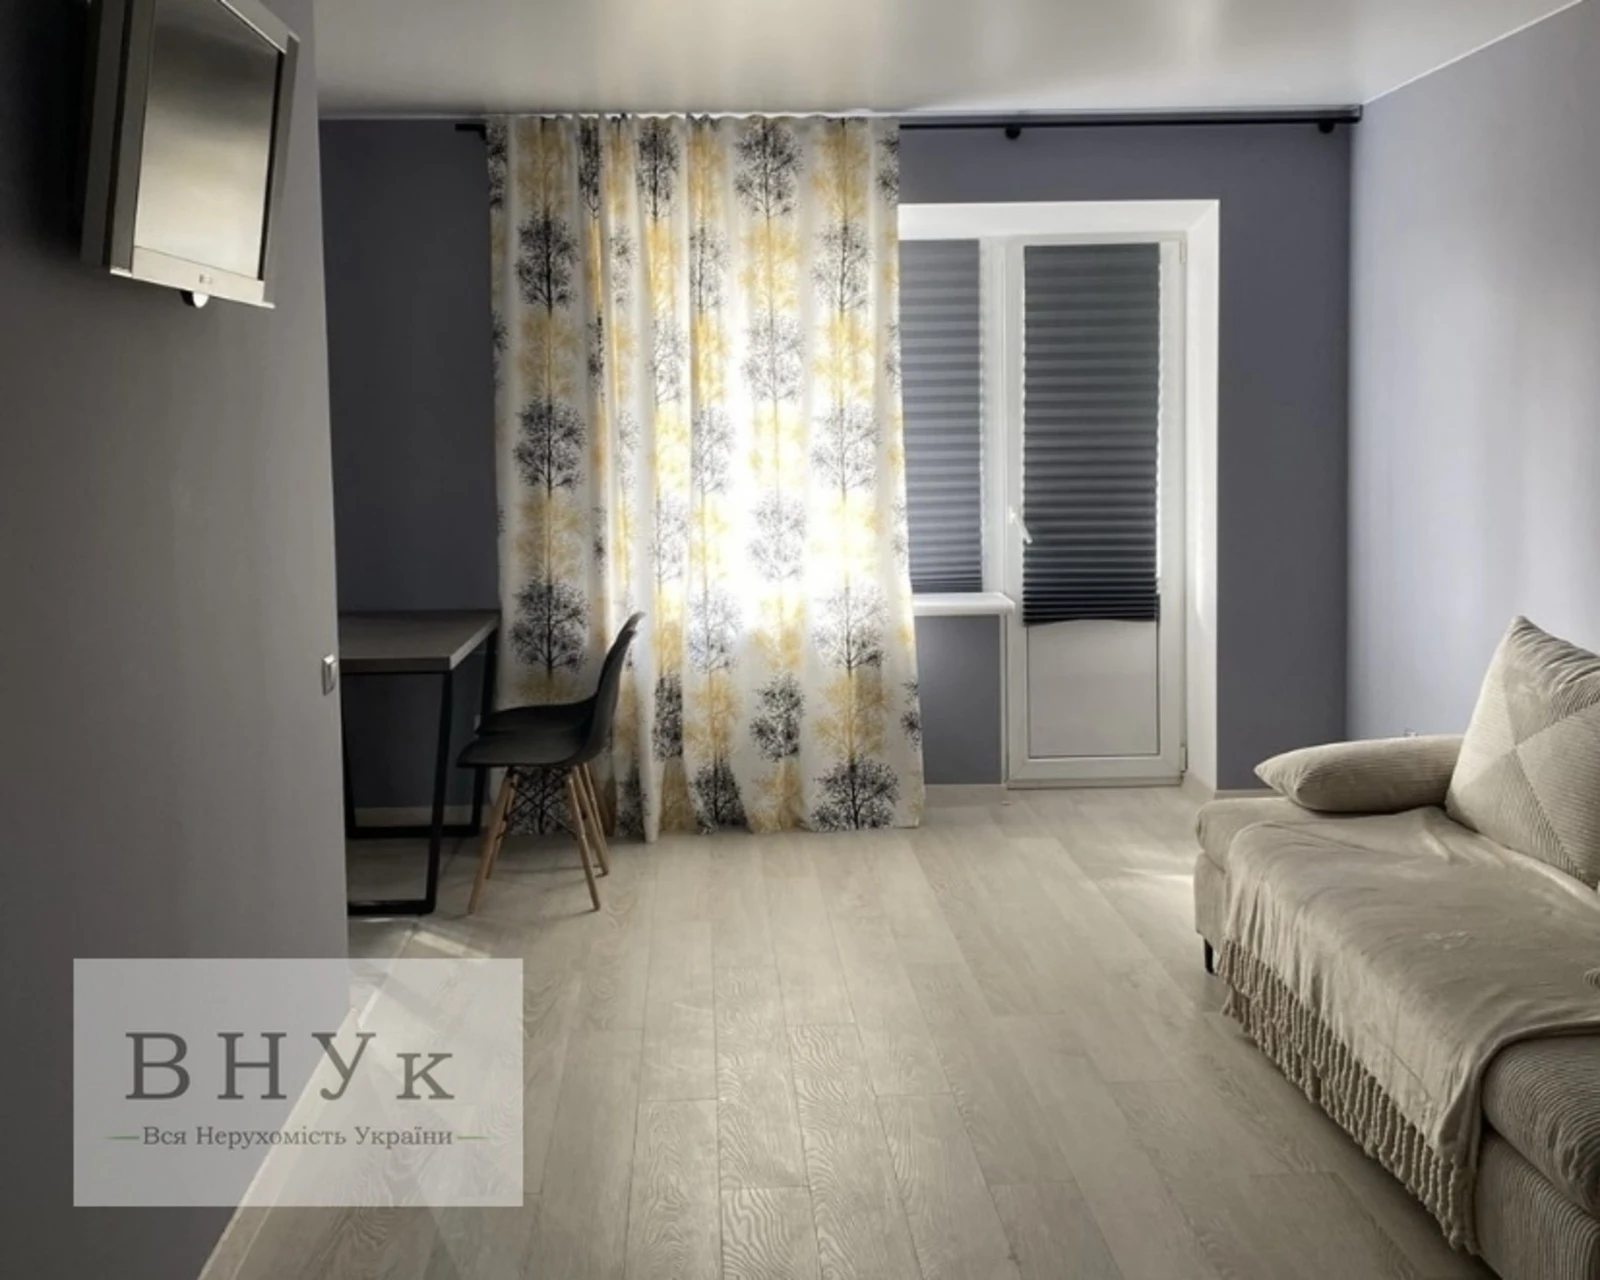 Apartments for sale. 2 rooms, 47 m², 5th floor/5 floors. Bandery S. vul., Ternopil. 